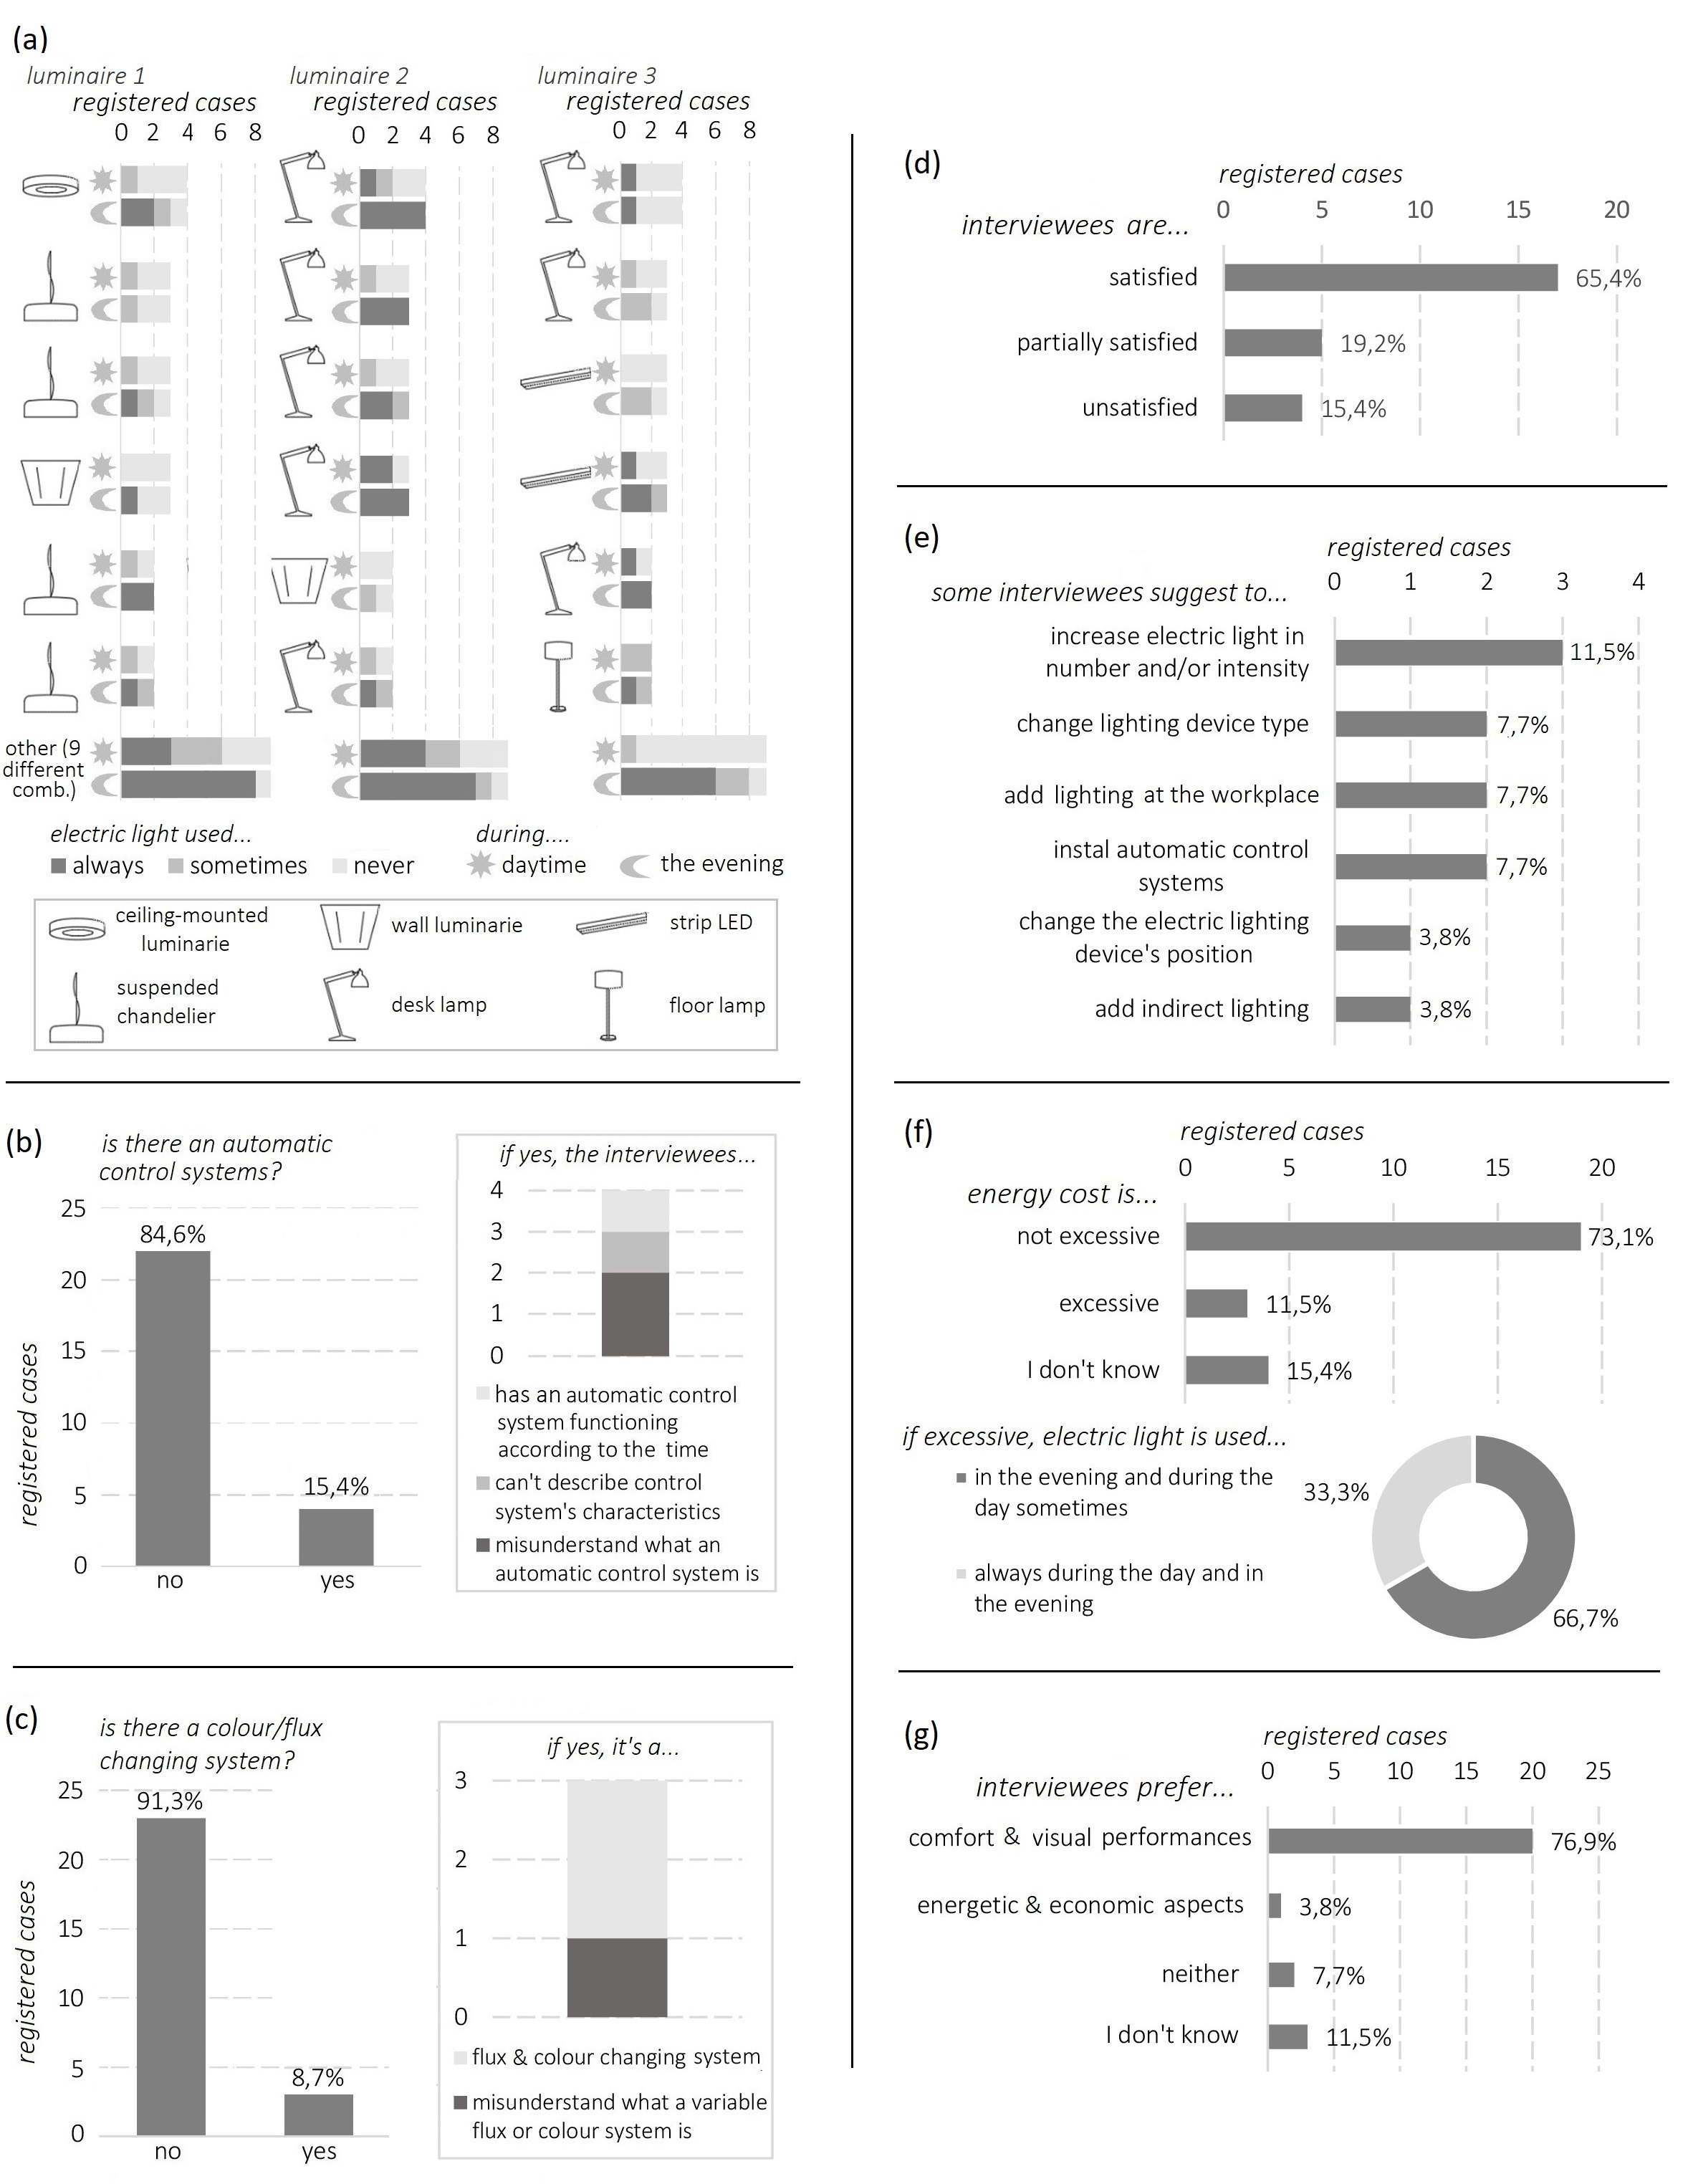 Data about control and overall evaluation of electric light in rooms equipped with three luminaires: frequency of use of the electric light (a), presence or not of automatic control system (b), typology of the automatic system (c), general satisfaction about the system (d), suggestions about the possibility to further improve electric light (e), opinions about energy costs (f) and opinions about what aspects are more important considering light, i.e. comfort or energy-saving (g); percentages refer to the number of rooms with three luminaires (26).